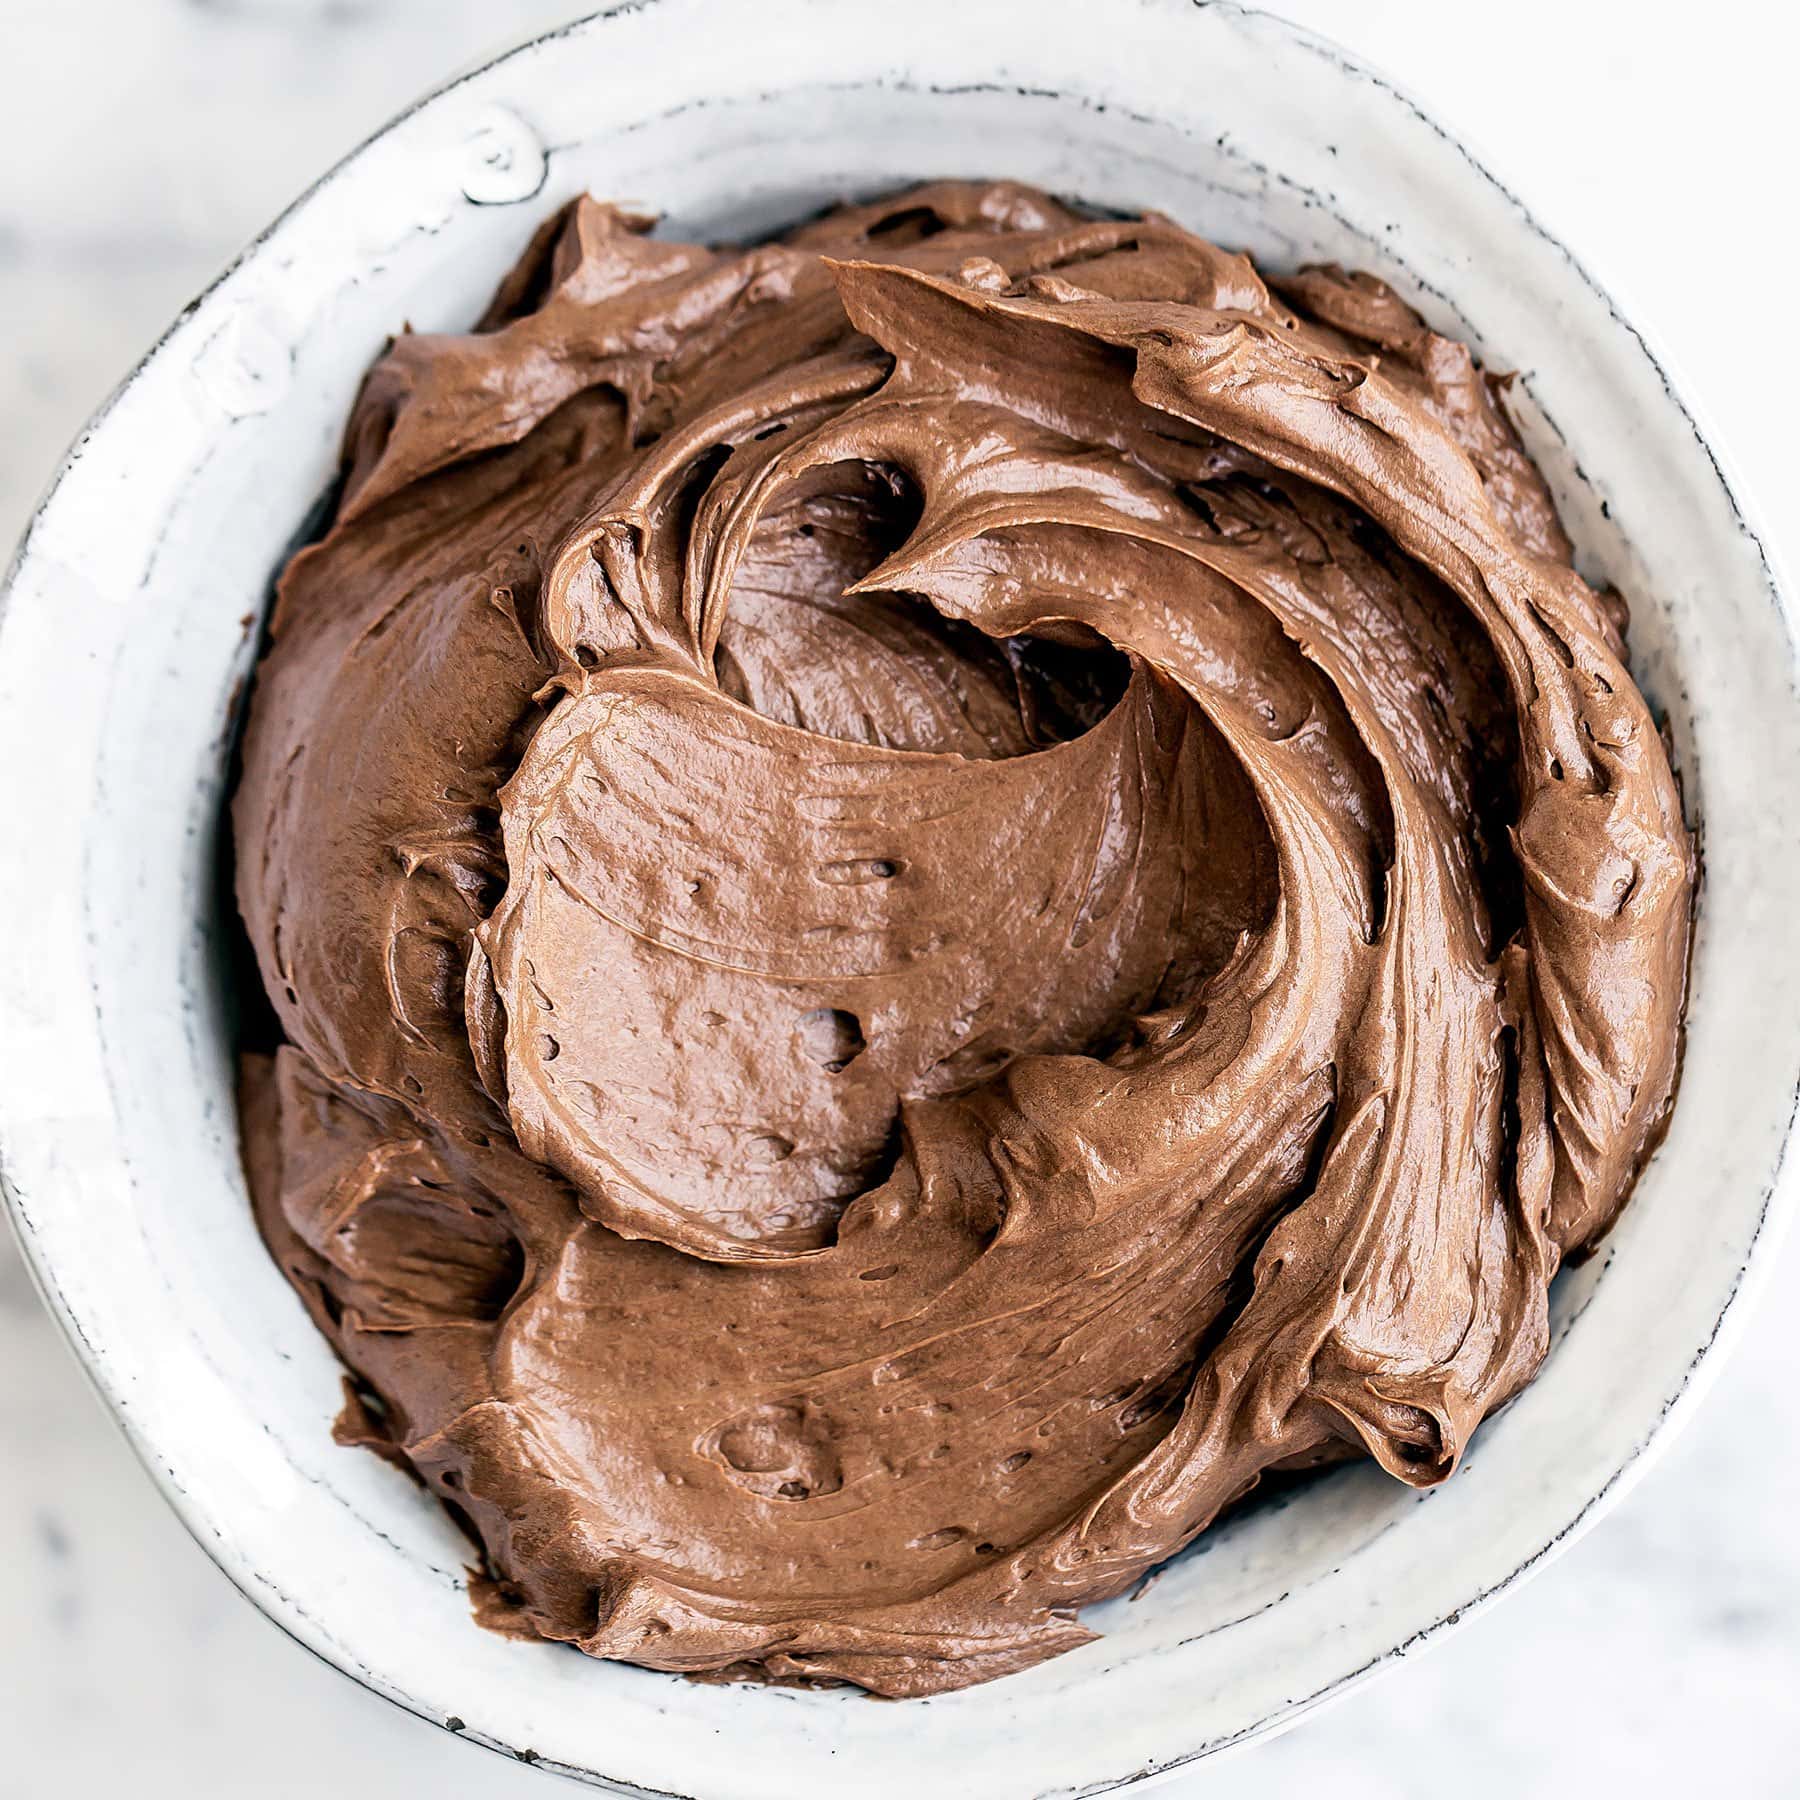 Ultra smooth, creamy, and perfectly sweet, this Chocolate Swiss Meringue Buttercream is quite possibly the BEST frosting you'll ever taste! Step by step photos AND how-to video included!